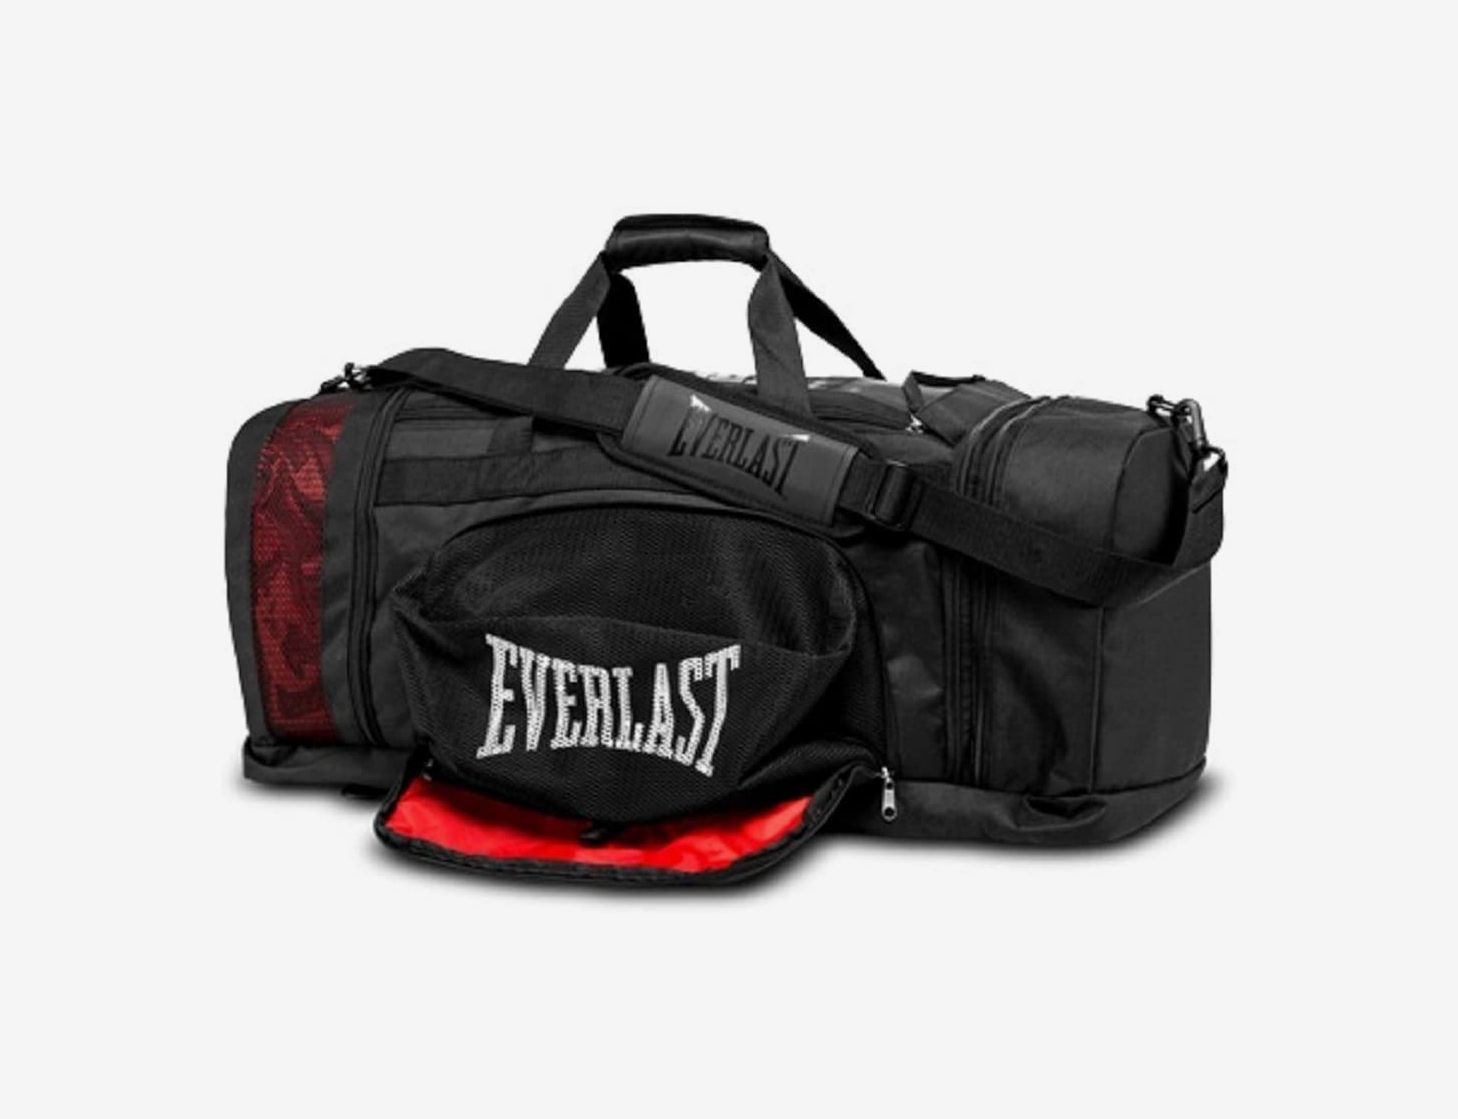 Derive director Play computer games 16 Best Gym Bags for Every Kind of Exerciser 2020 | The Strategist